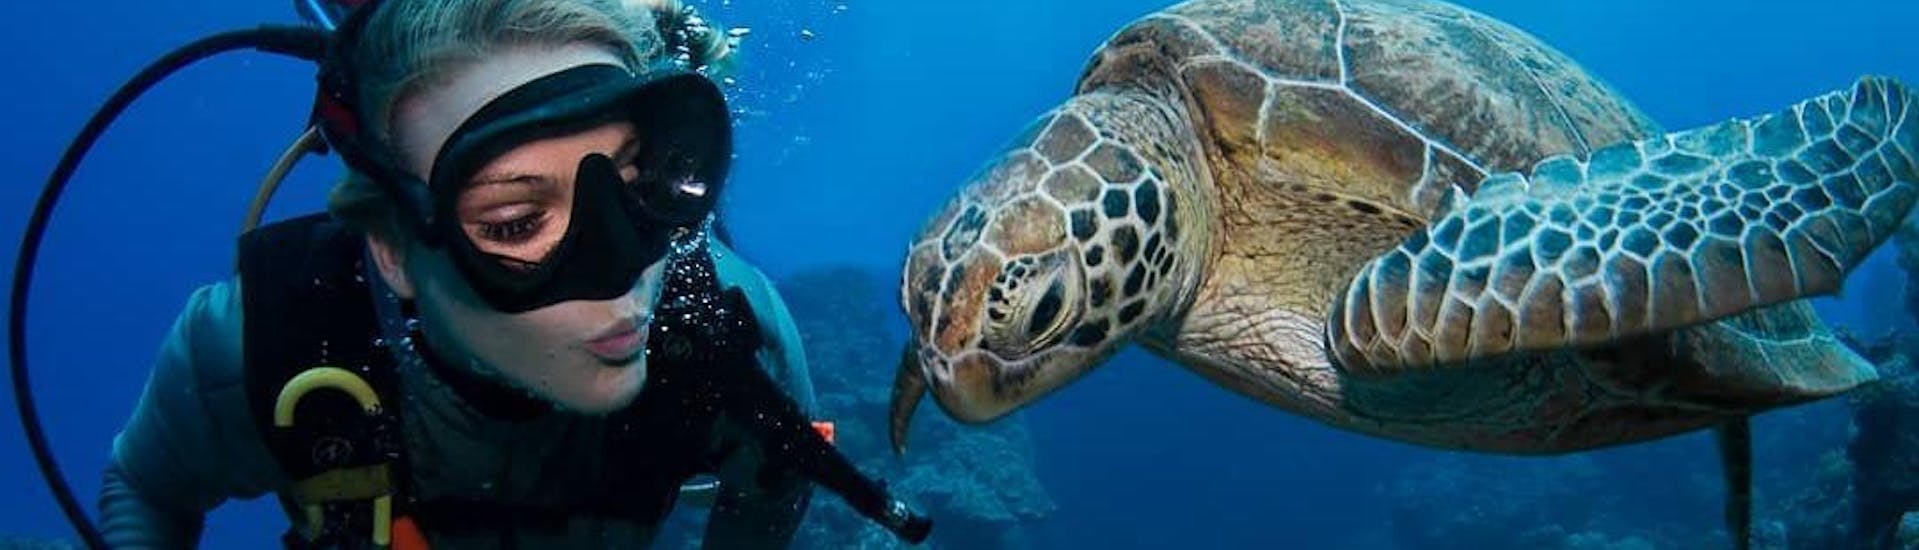 A woman is admiring a curious turtle during the Guided Dives on the Great Barrier Reef for Certified Divers organised by Passions of Paradise.